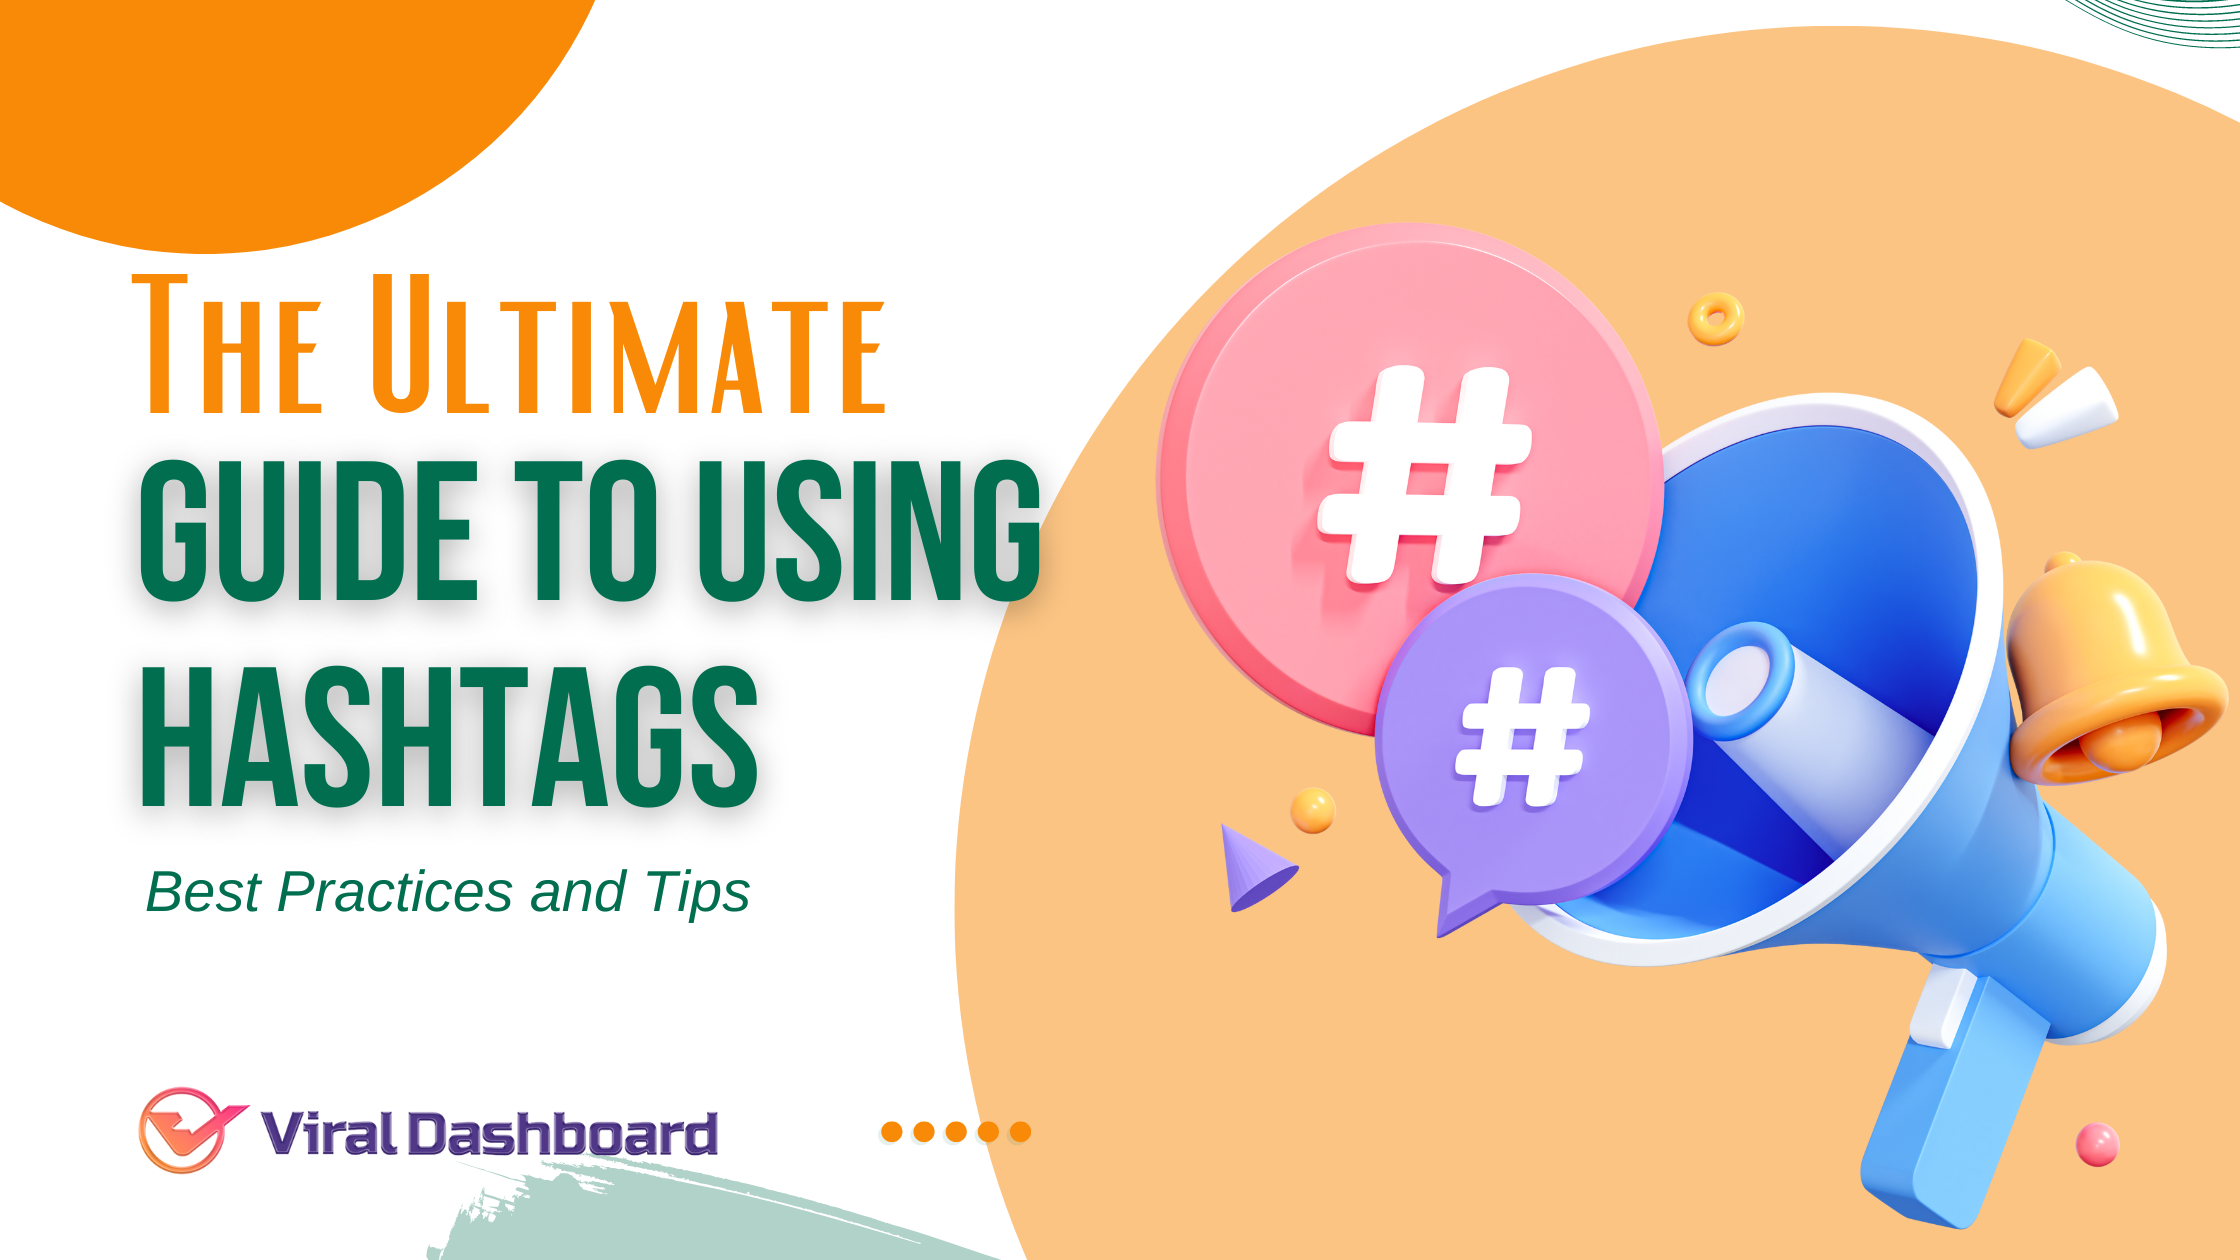 The Ultimate Guide to Using Hashtags: Best Practices and Tips